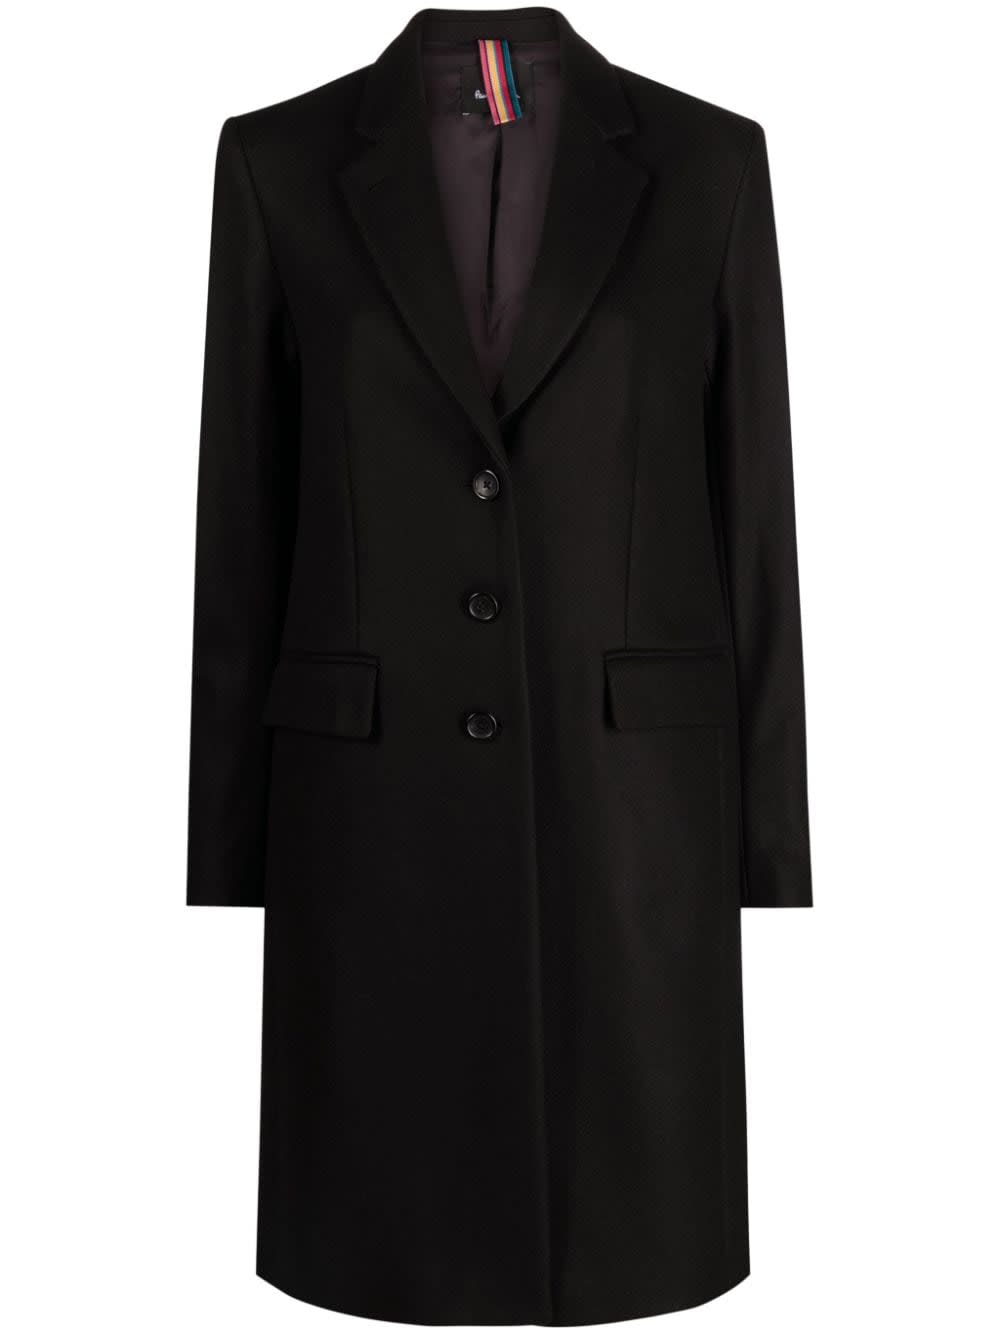 PS BY PAUL SMITH SINGLE BREASTED COAT